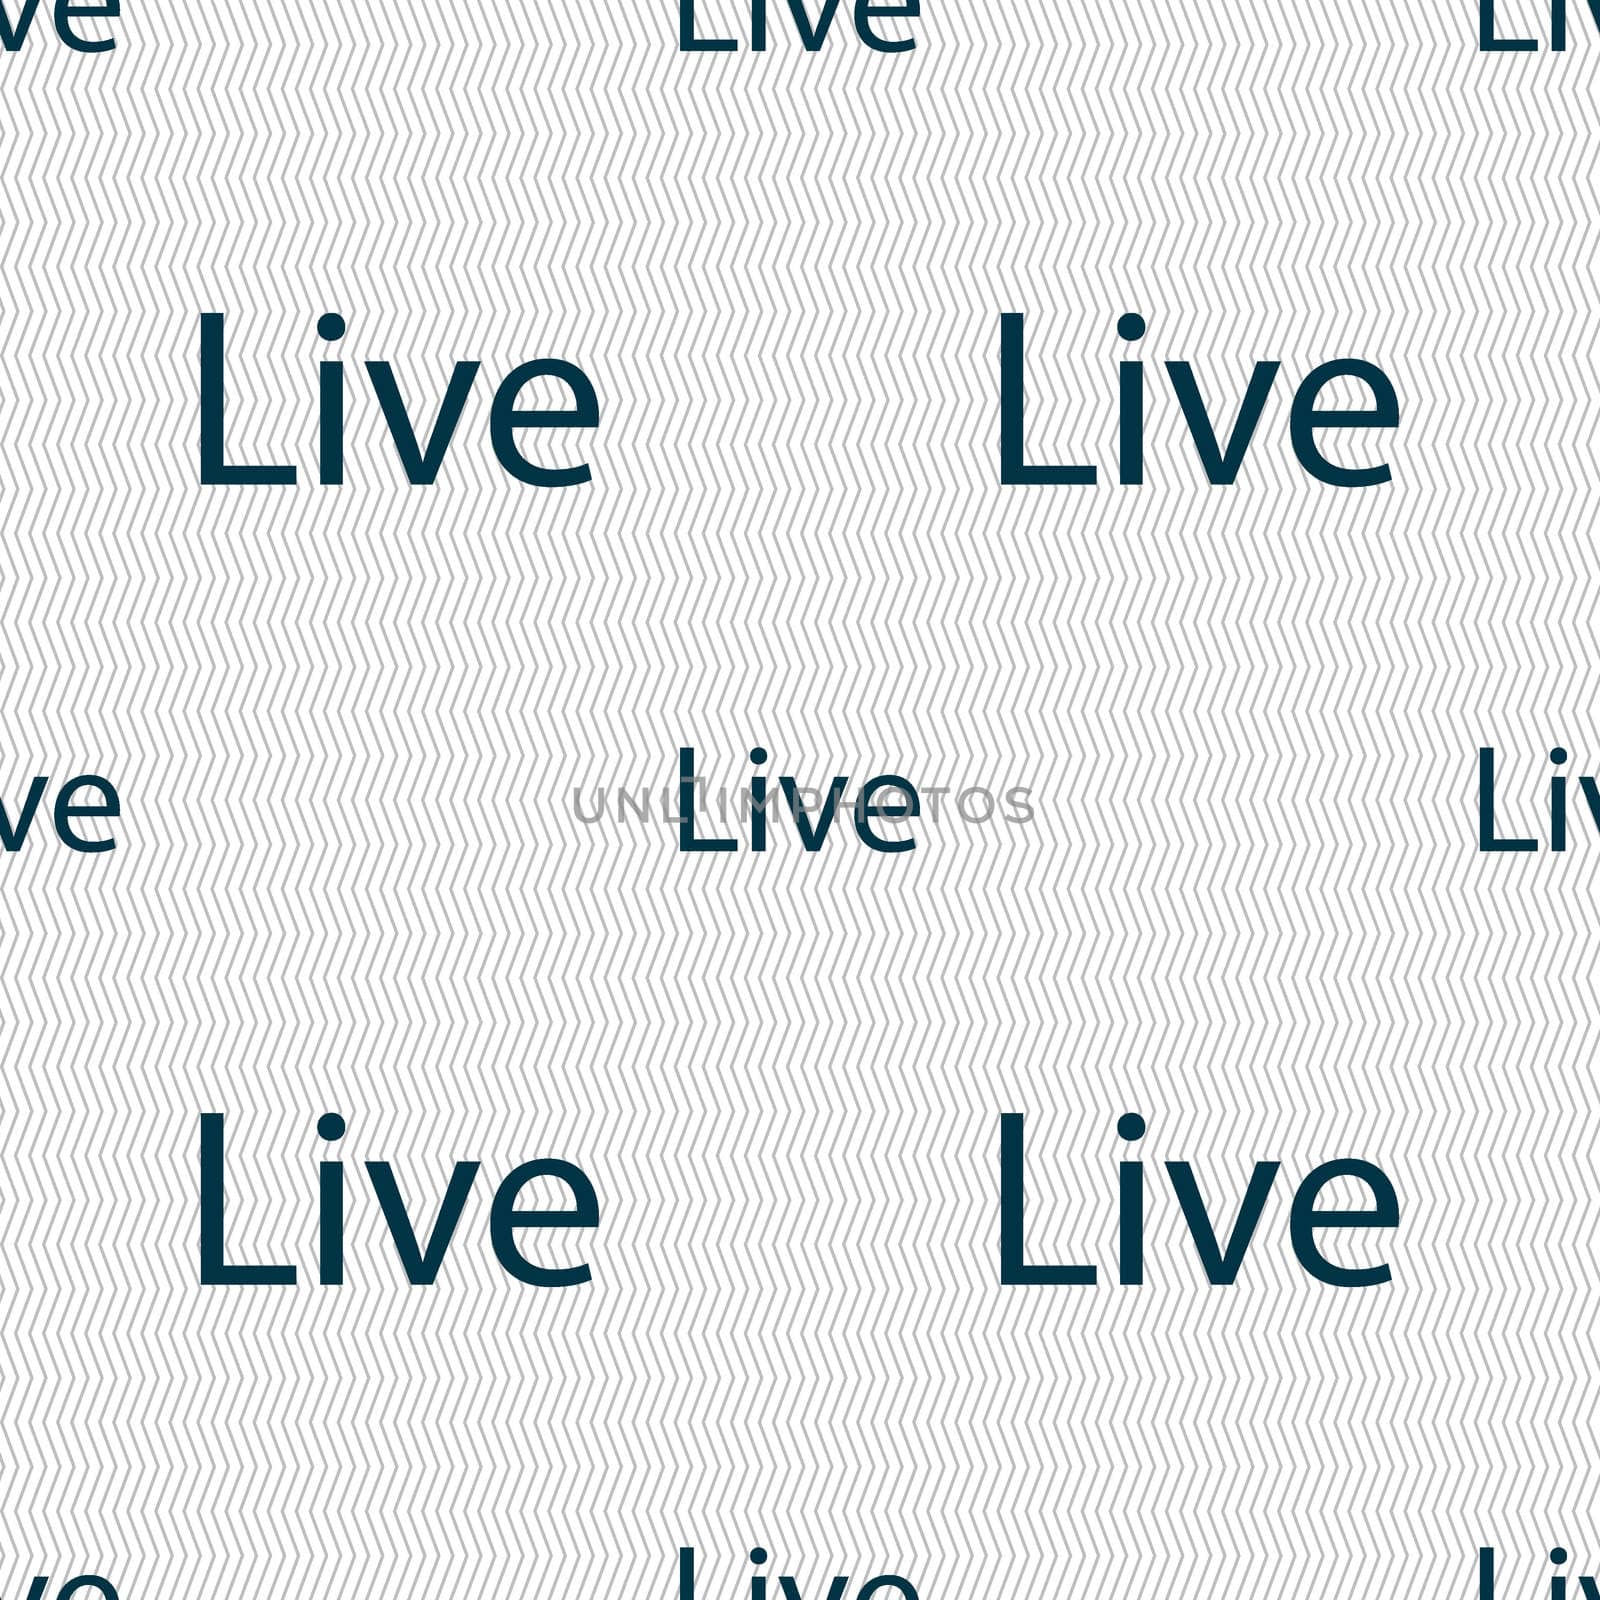 Live sign icon. Seamless abstract background with geometric shapes. illustration